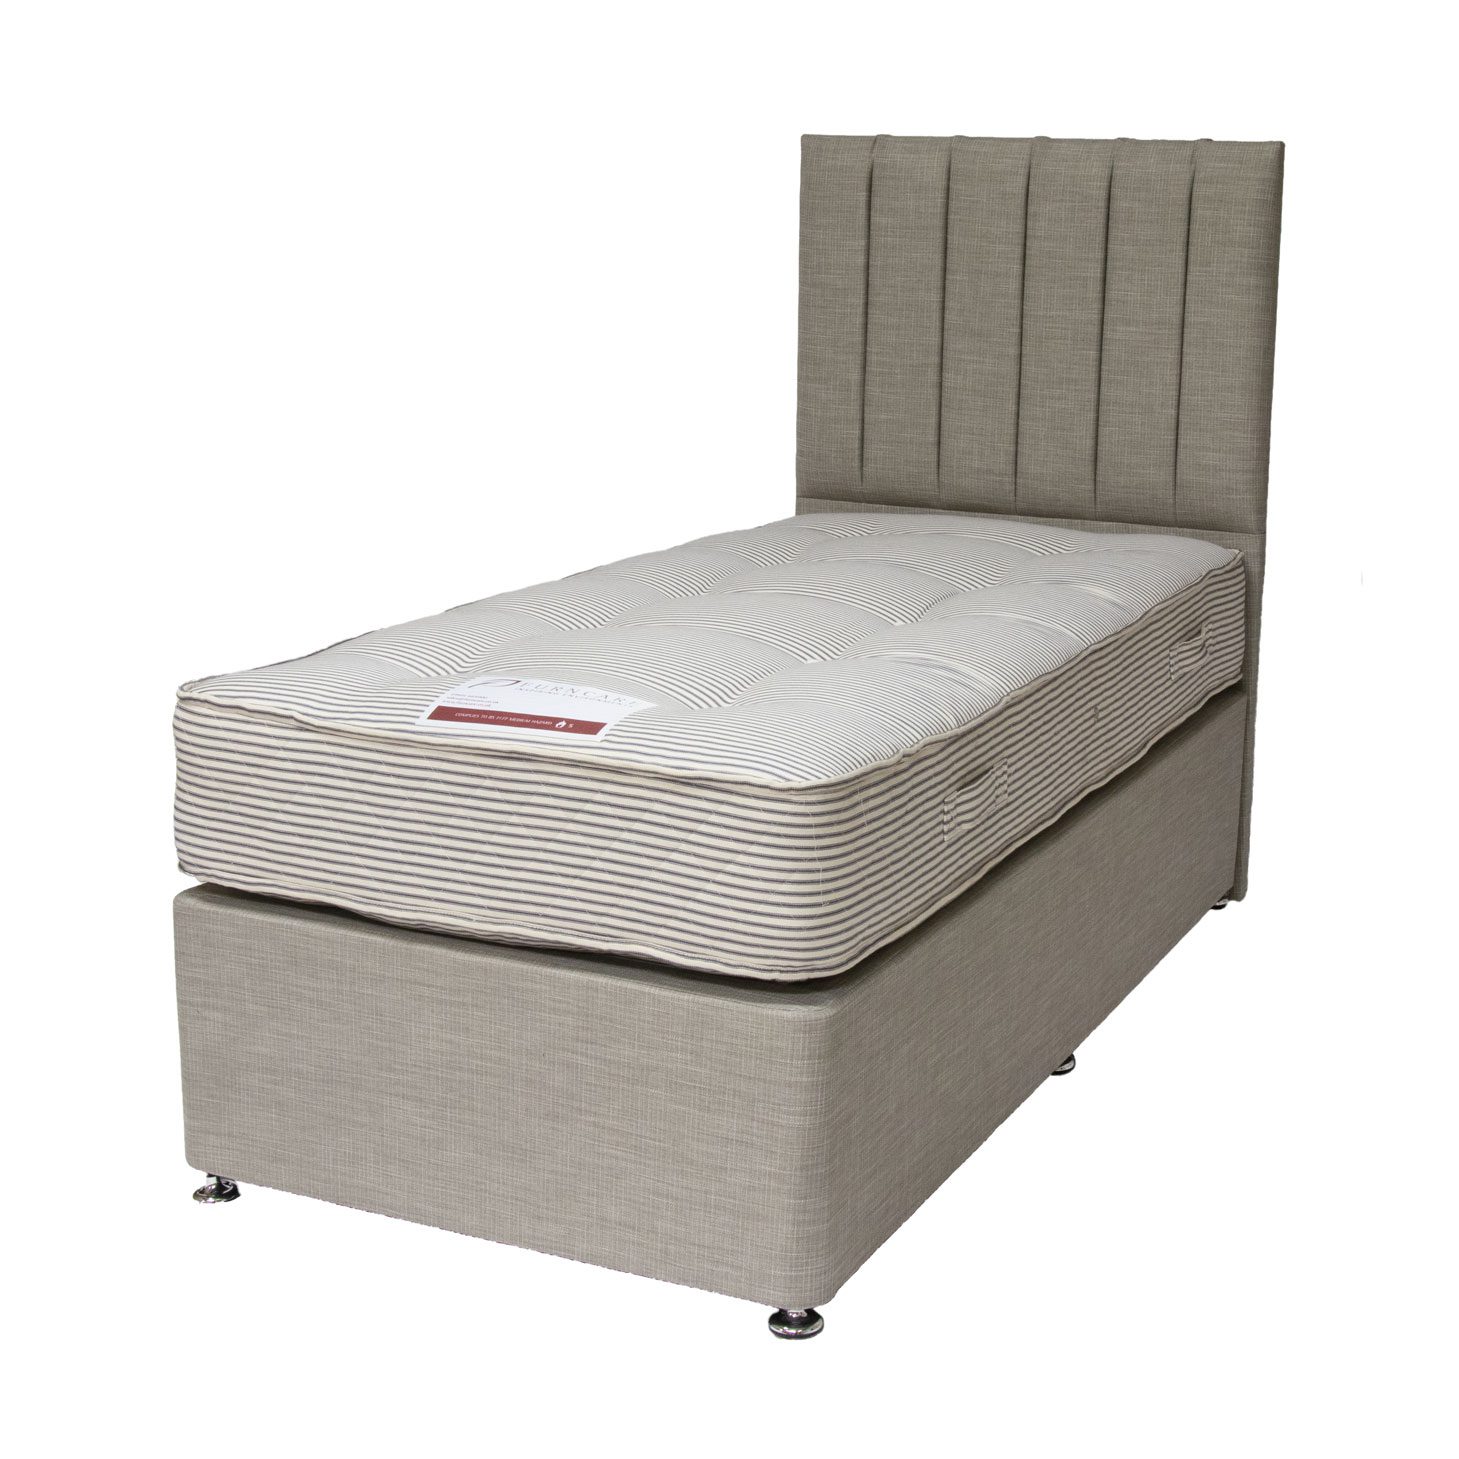 Oster Deluxe Bed Base